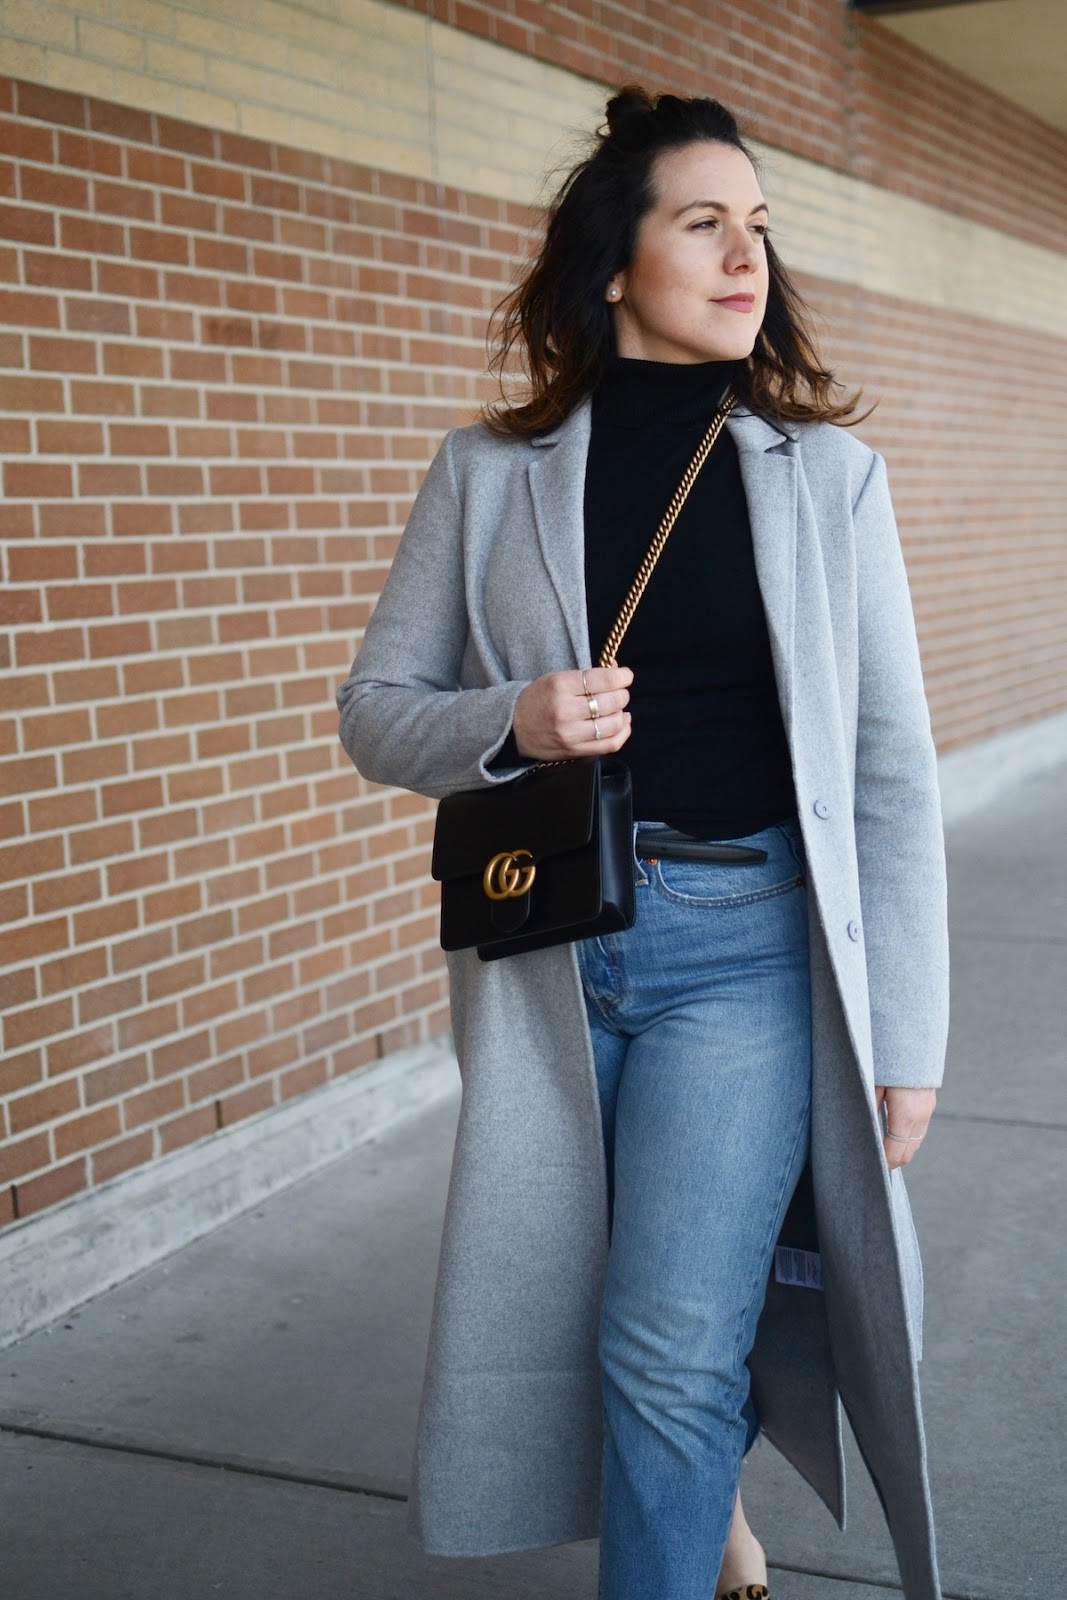 Gucci Marmont bag vancouver blogger outfit grey wool Tom Taylor coat Sears levis wedgie jeans